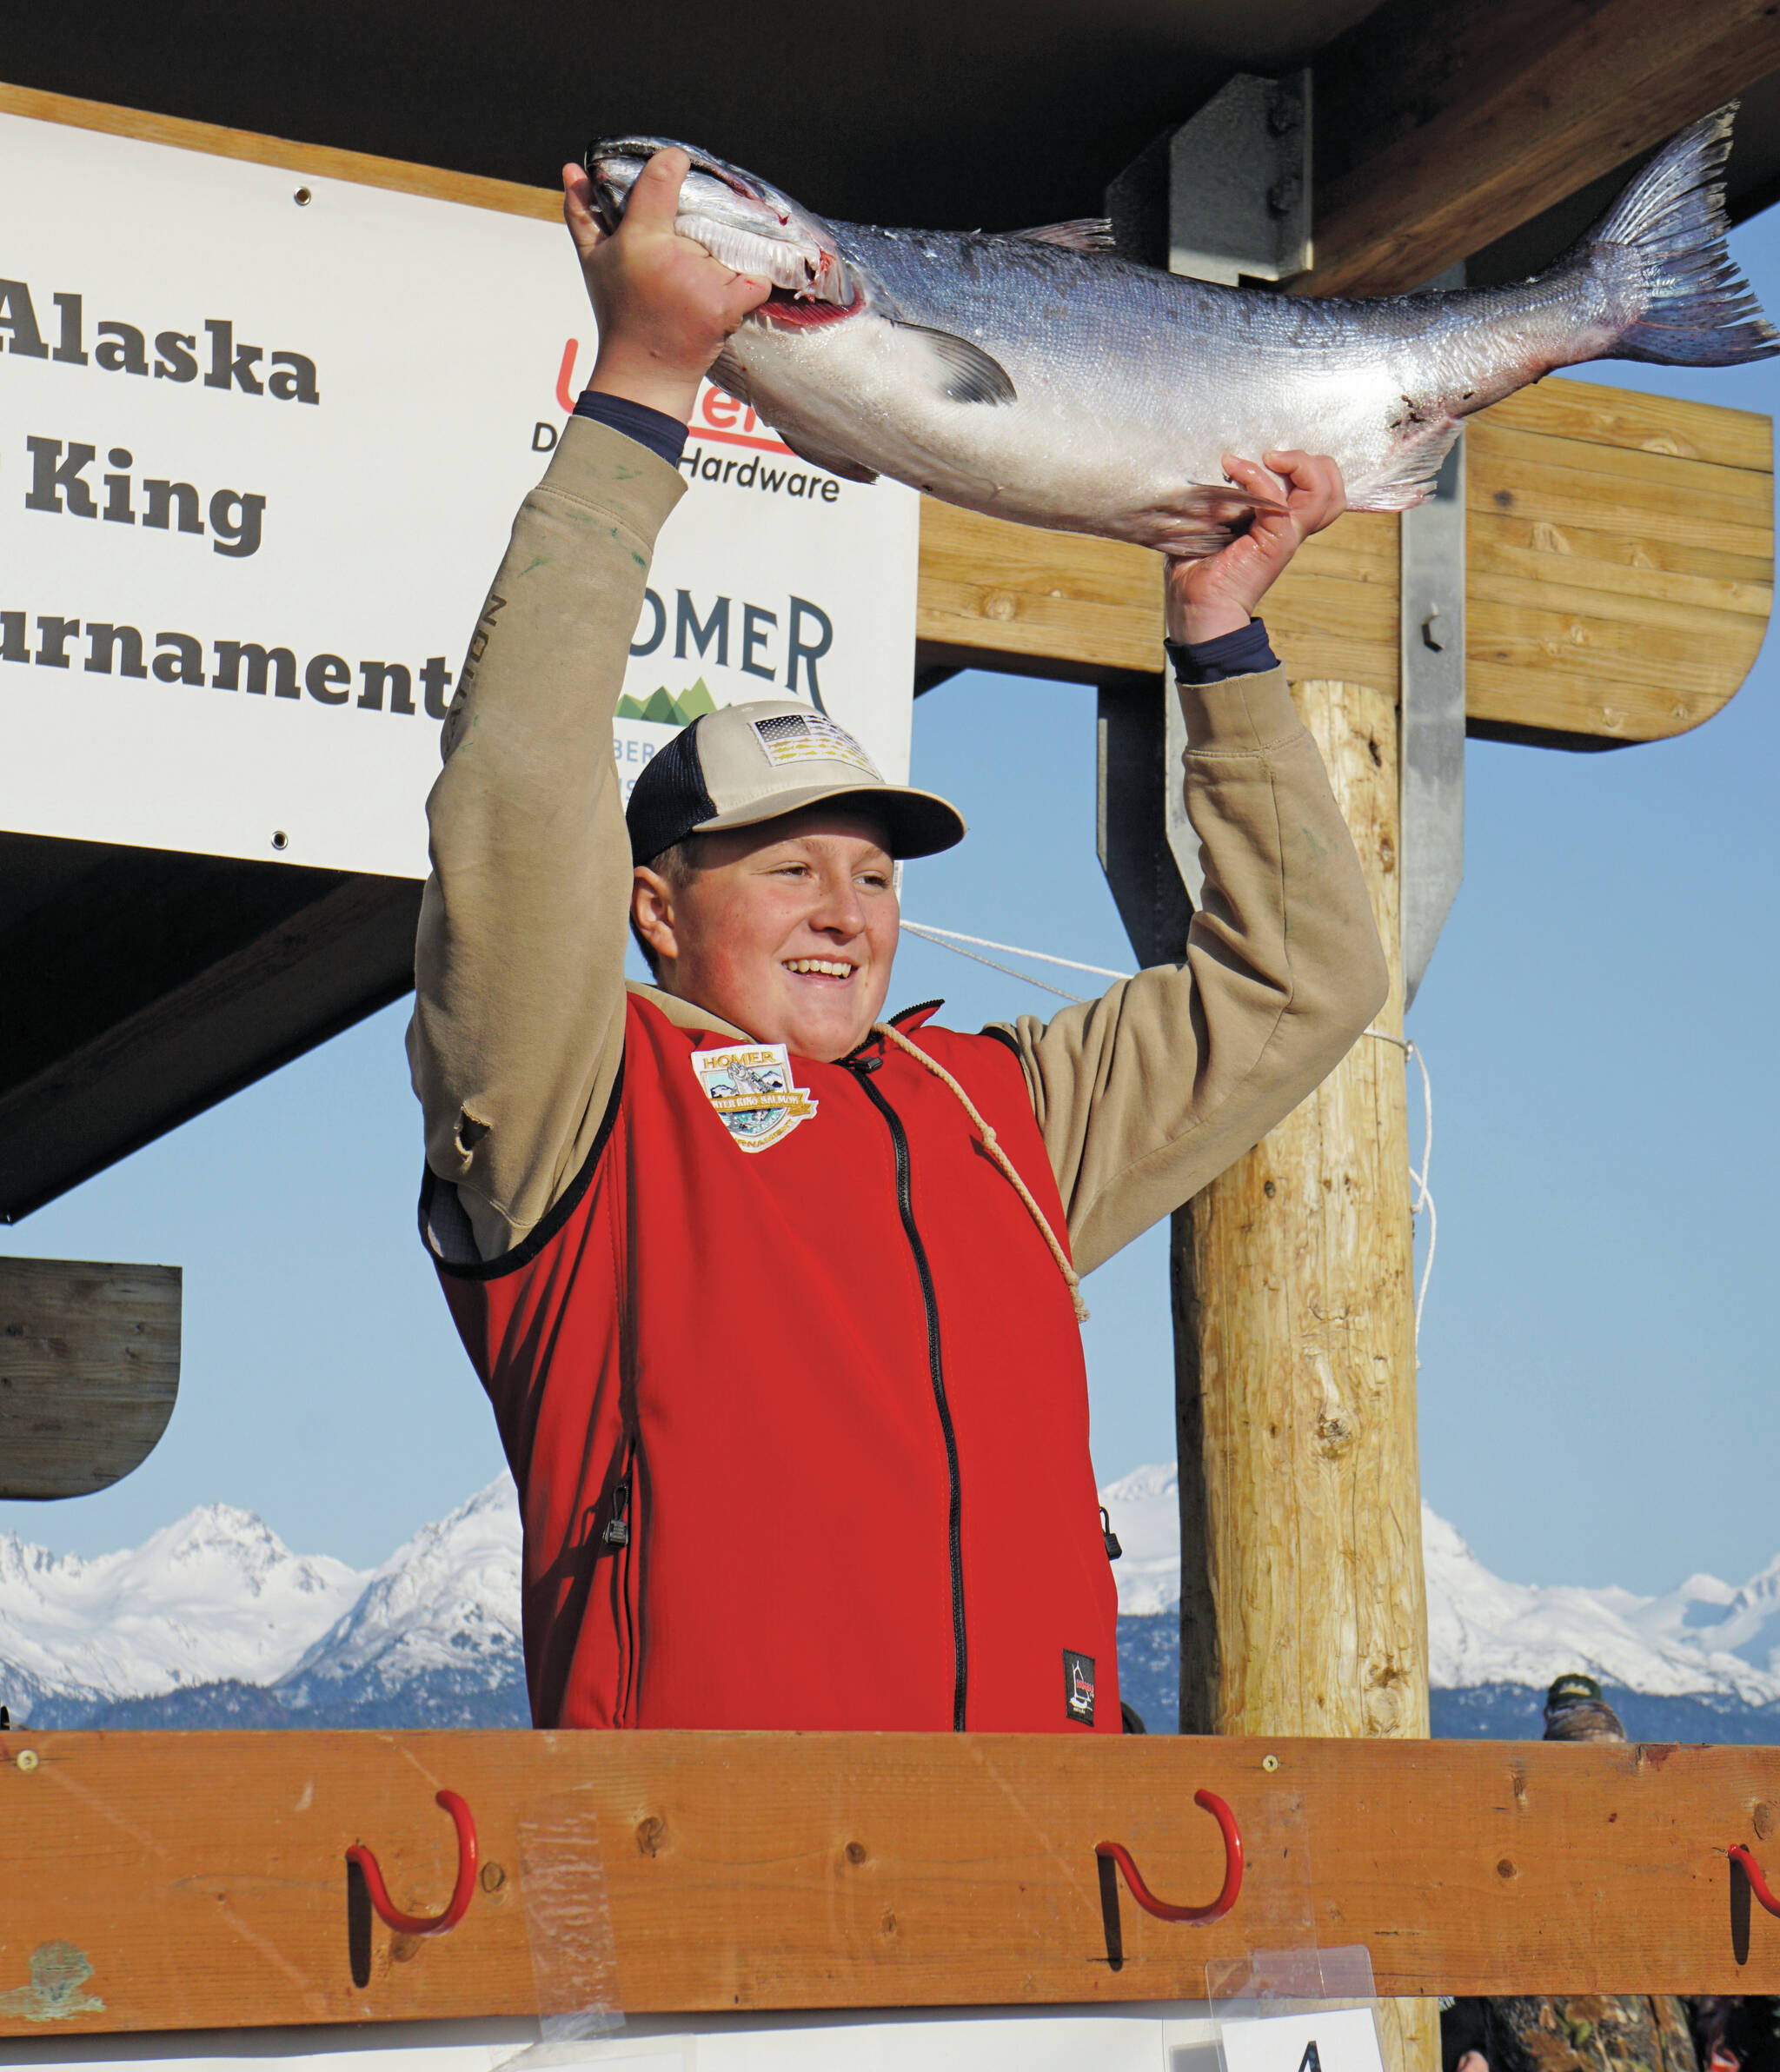 Weston Marley holds up the 27.38-pound winter king salmon he caught to win the 28th annual Homer Winter King Salmon Tourament on Sunday, April 10 in Kachemak Bay. Marley, 15, fished on the Fly Dough with his father, Jay Marley, and brother, Andrew Marley. It’s the second year a Marley boy won the tournament, with Andrew taking first place for a 25.62-pound king in 2022. (Photo by Michael Armstrong/Homer News)